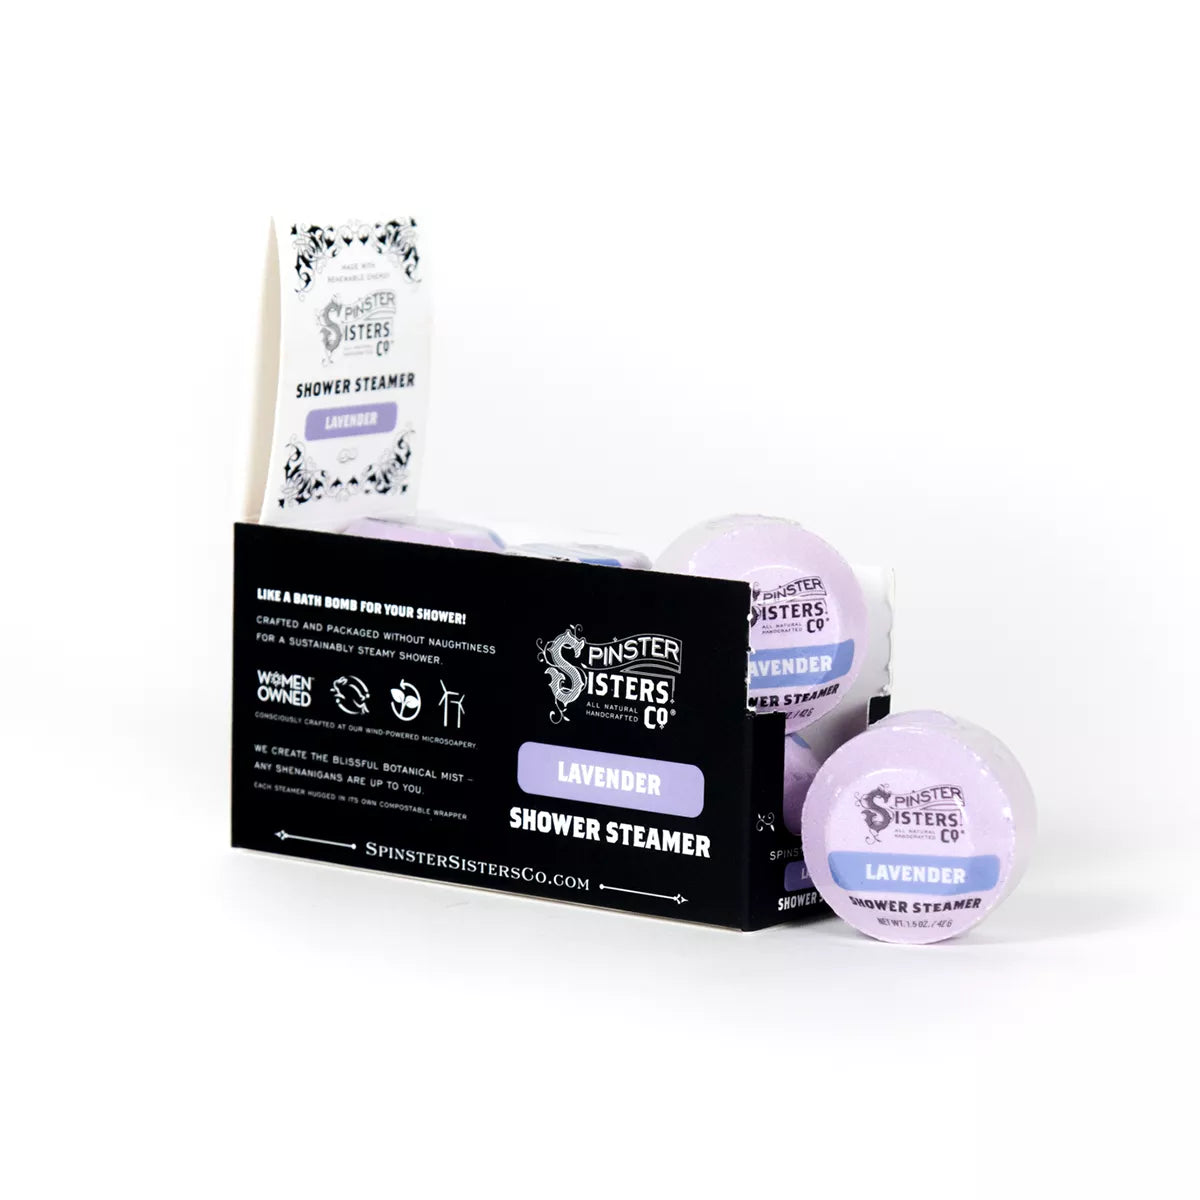 Black Lavender Shower Steamer - Six Pack box with Purple Lavender Steamers inside and beside box.